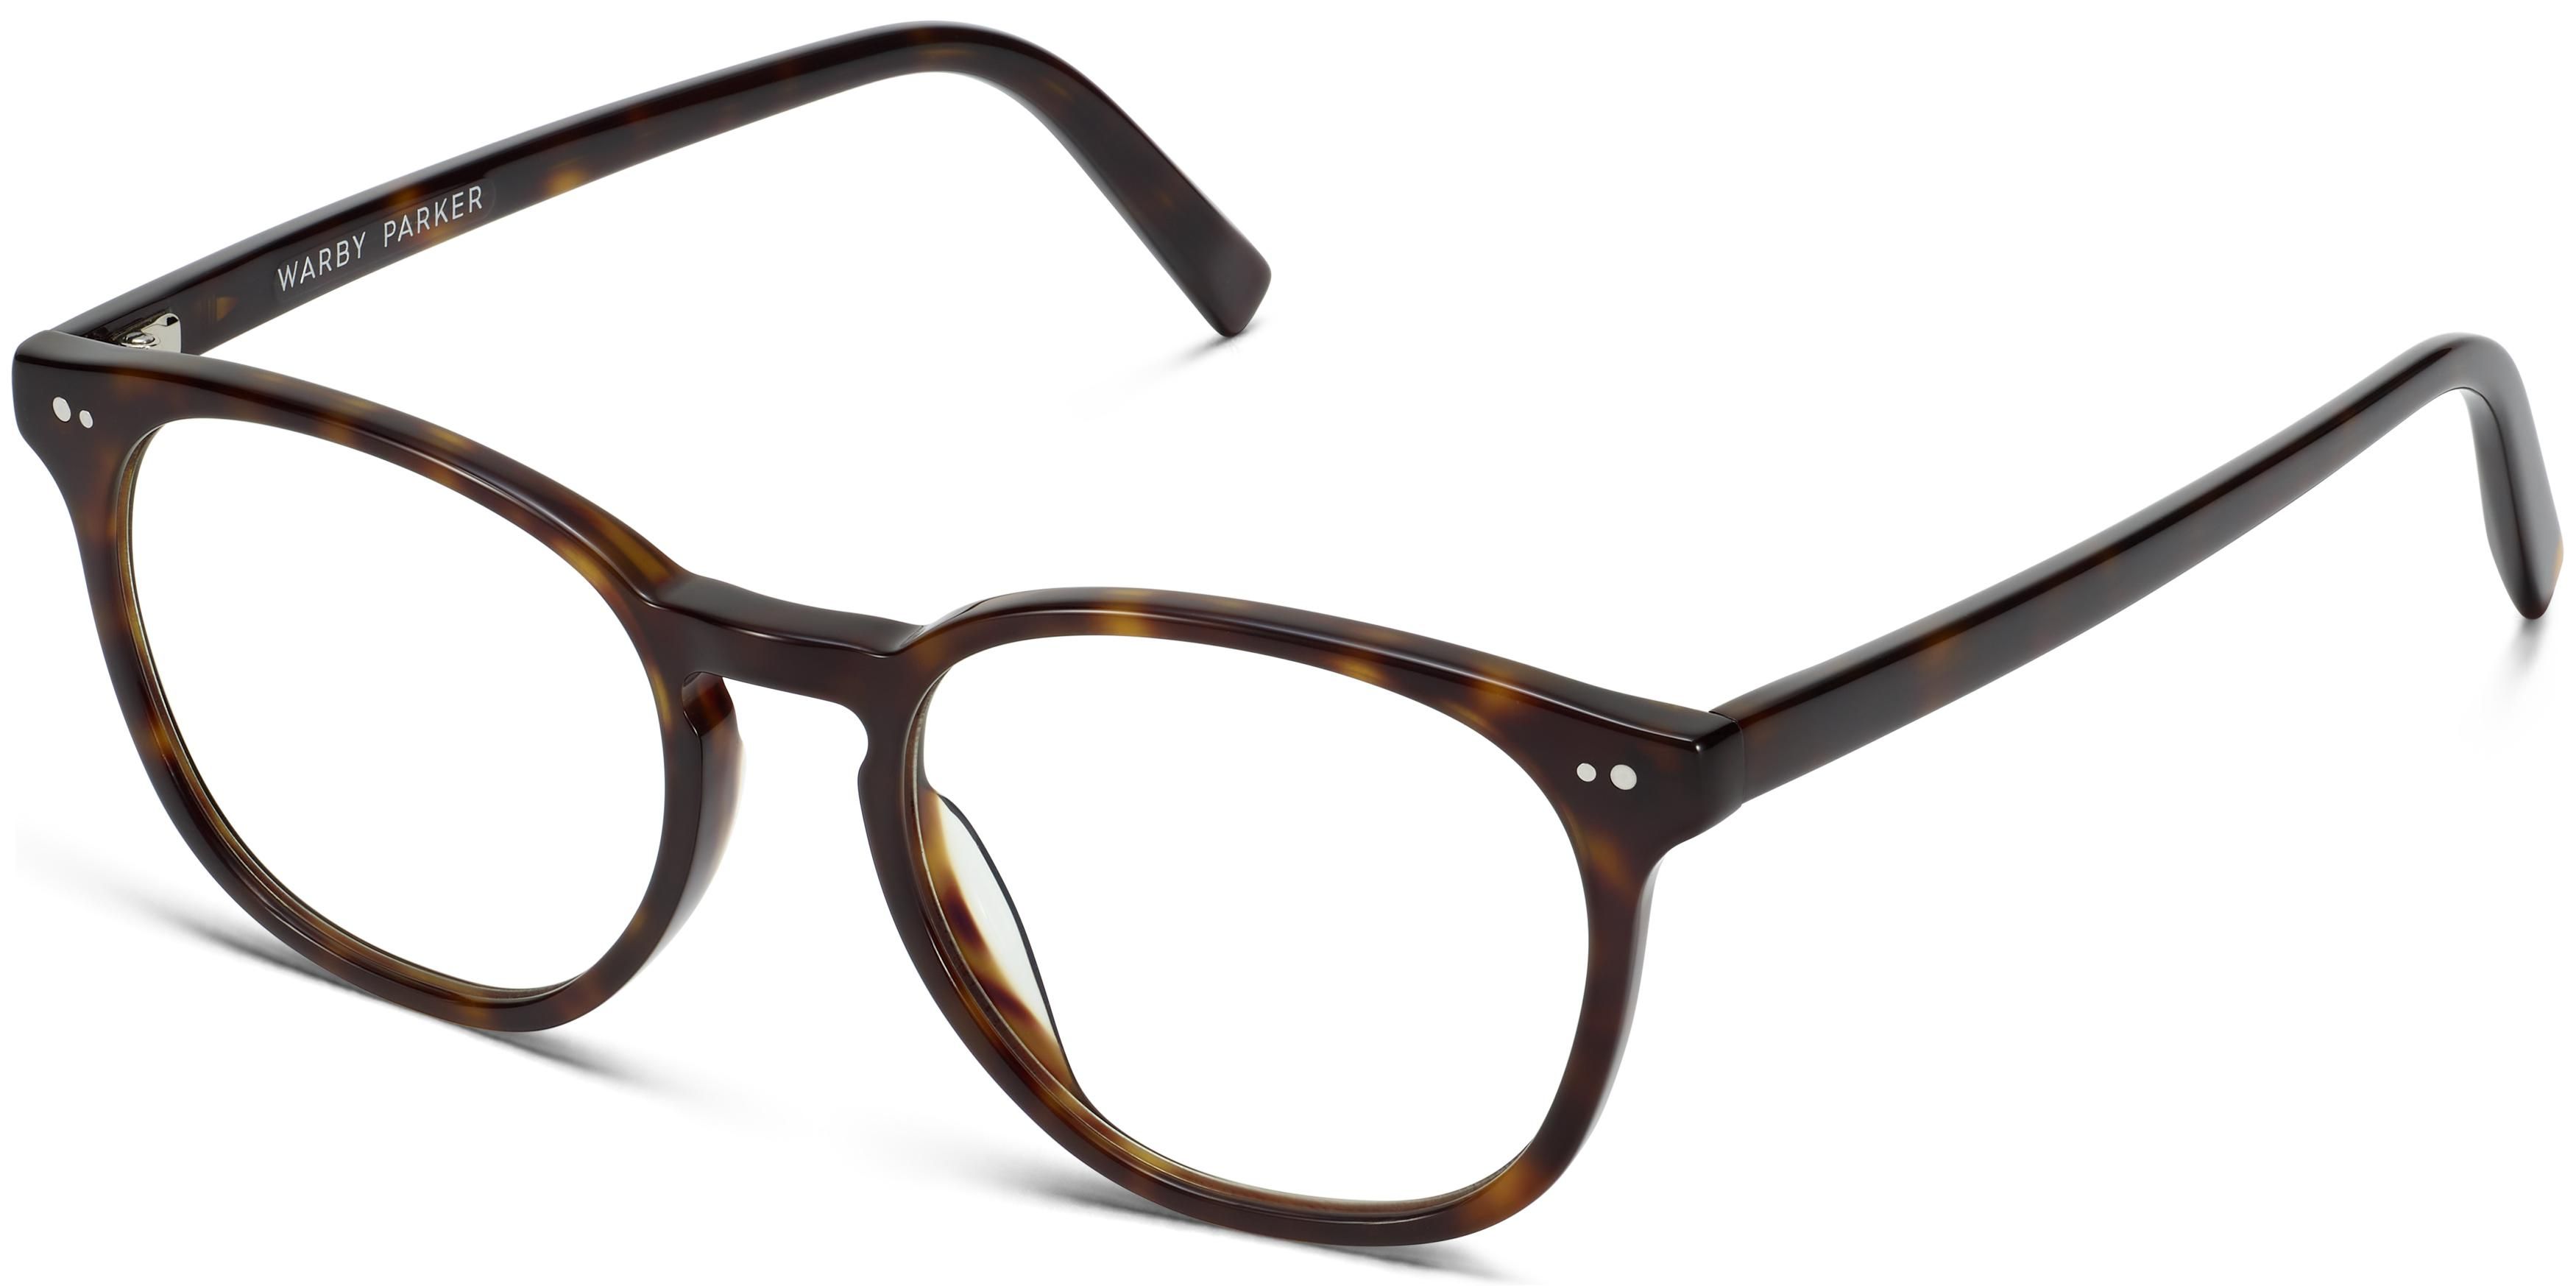 Carlton Eyeglasses in Ristretto Tortoise | Warby Parker | Warby Parker (US)